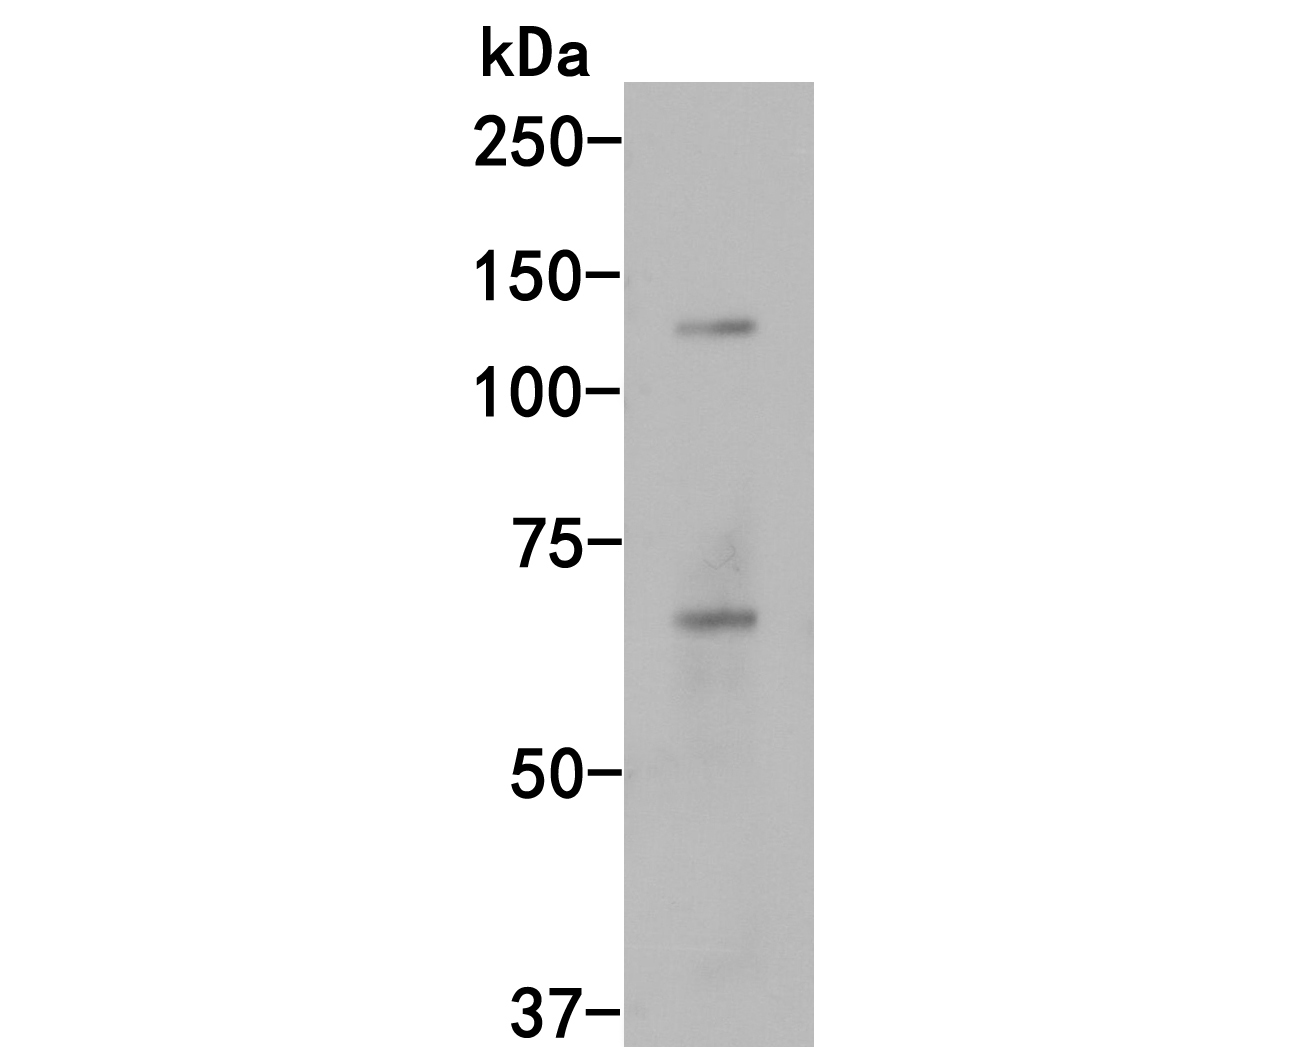 Western blot analysis of Phospho-Tau(S396) on SHSY5Y cell lysates. Proteins were transferred to a PVDF membrane and blocked with 5% BSA in PBS for 1 hour at room temperature. The primary antibody (ET1611-68, 1/500) was used in 5% BSA at room temperature for 2 hours. Goat Anti-Rabbit IgG - HRP Secondary Antibody (HA1001) at 1:5,000 dilution was used for 1 hour at room temperature.